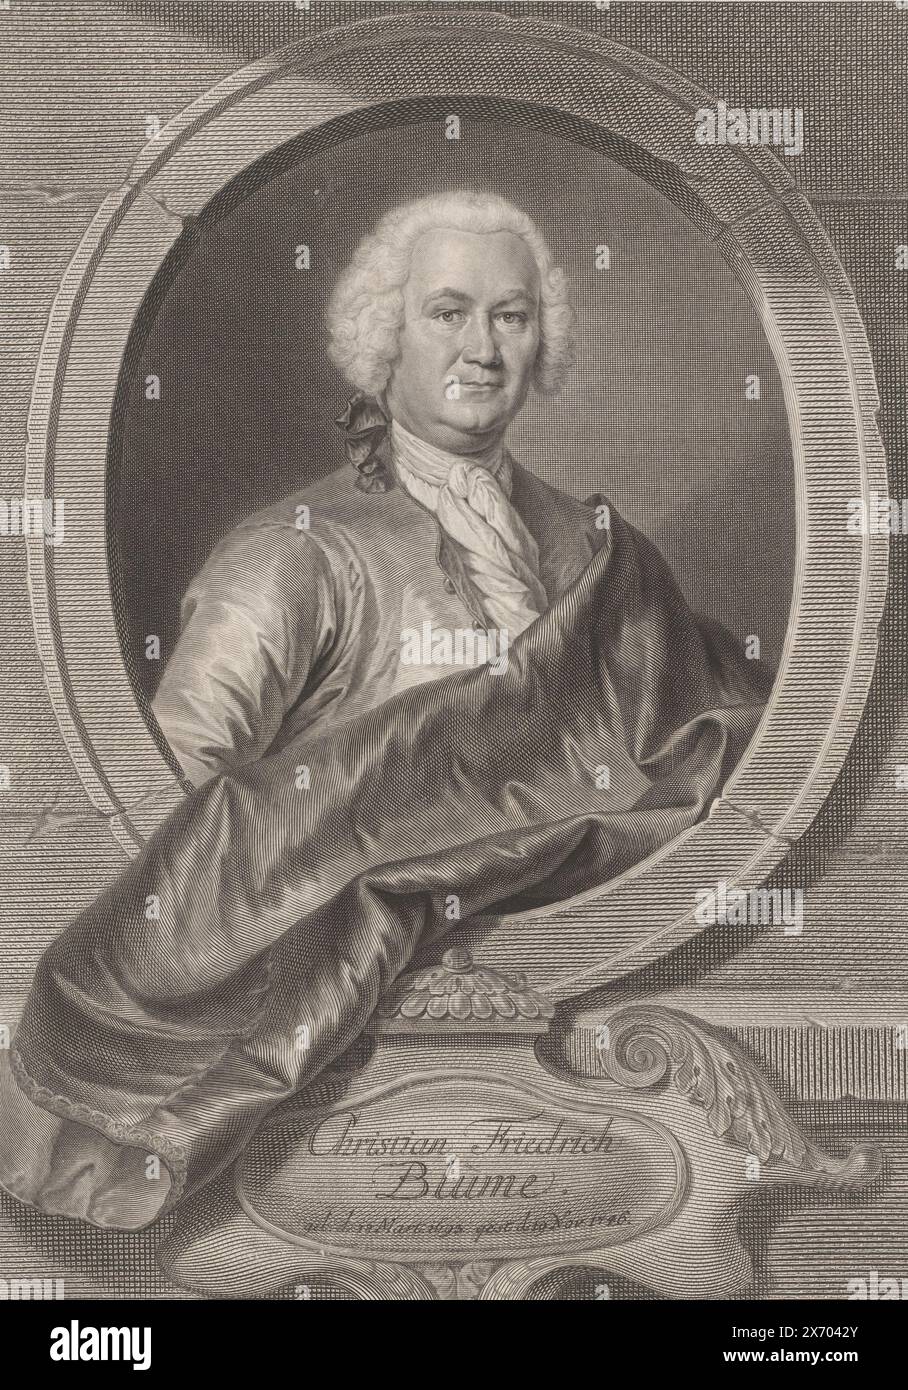 Portrait of Christian Friedrich Blume, print, print maker: Georg Friedrich Schmidt, (mentioned on object), after painting by: Joachim Martin Falbe, (mentioned on object), Berlin, 1748, paper, engraving, height, 377 mm × width, 269 mm Stock Photo